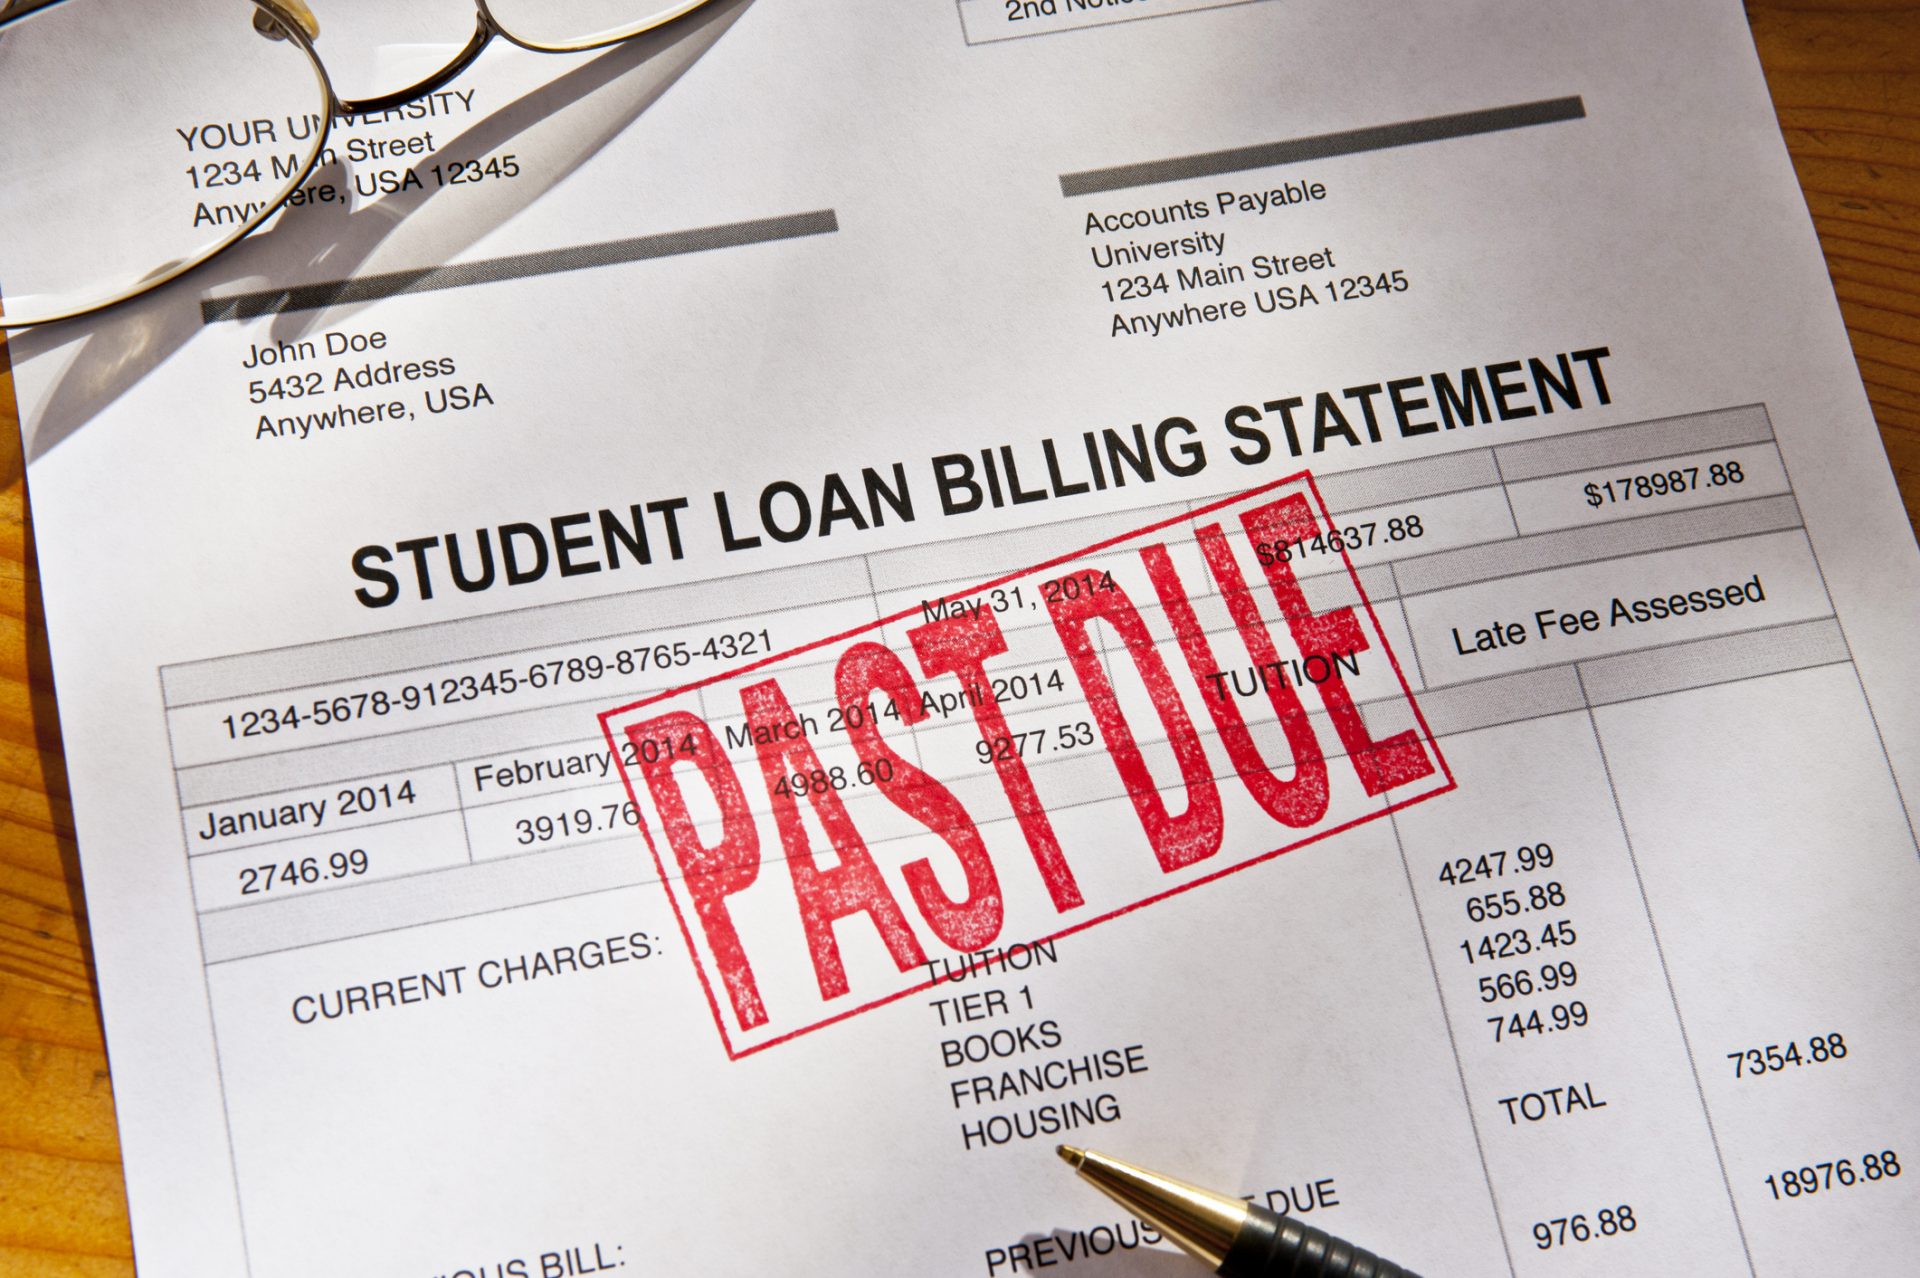 The College Student's Guide to Smart Student Loan Borrowing